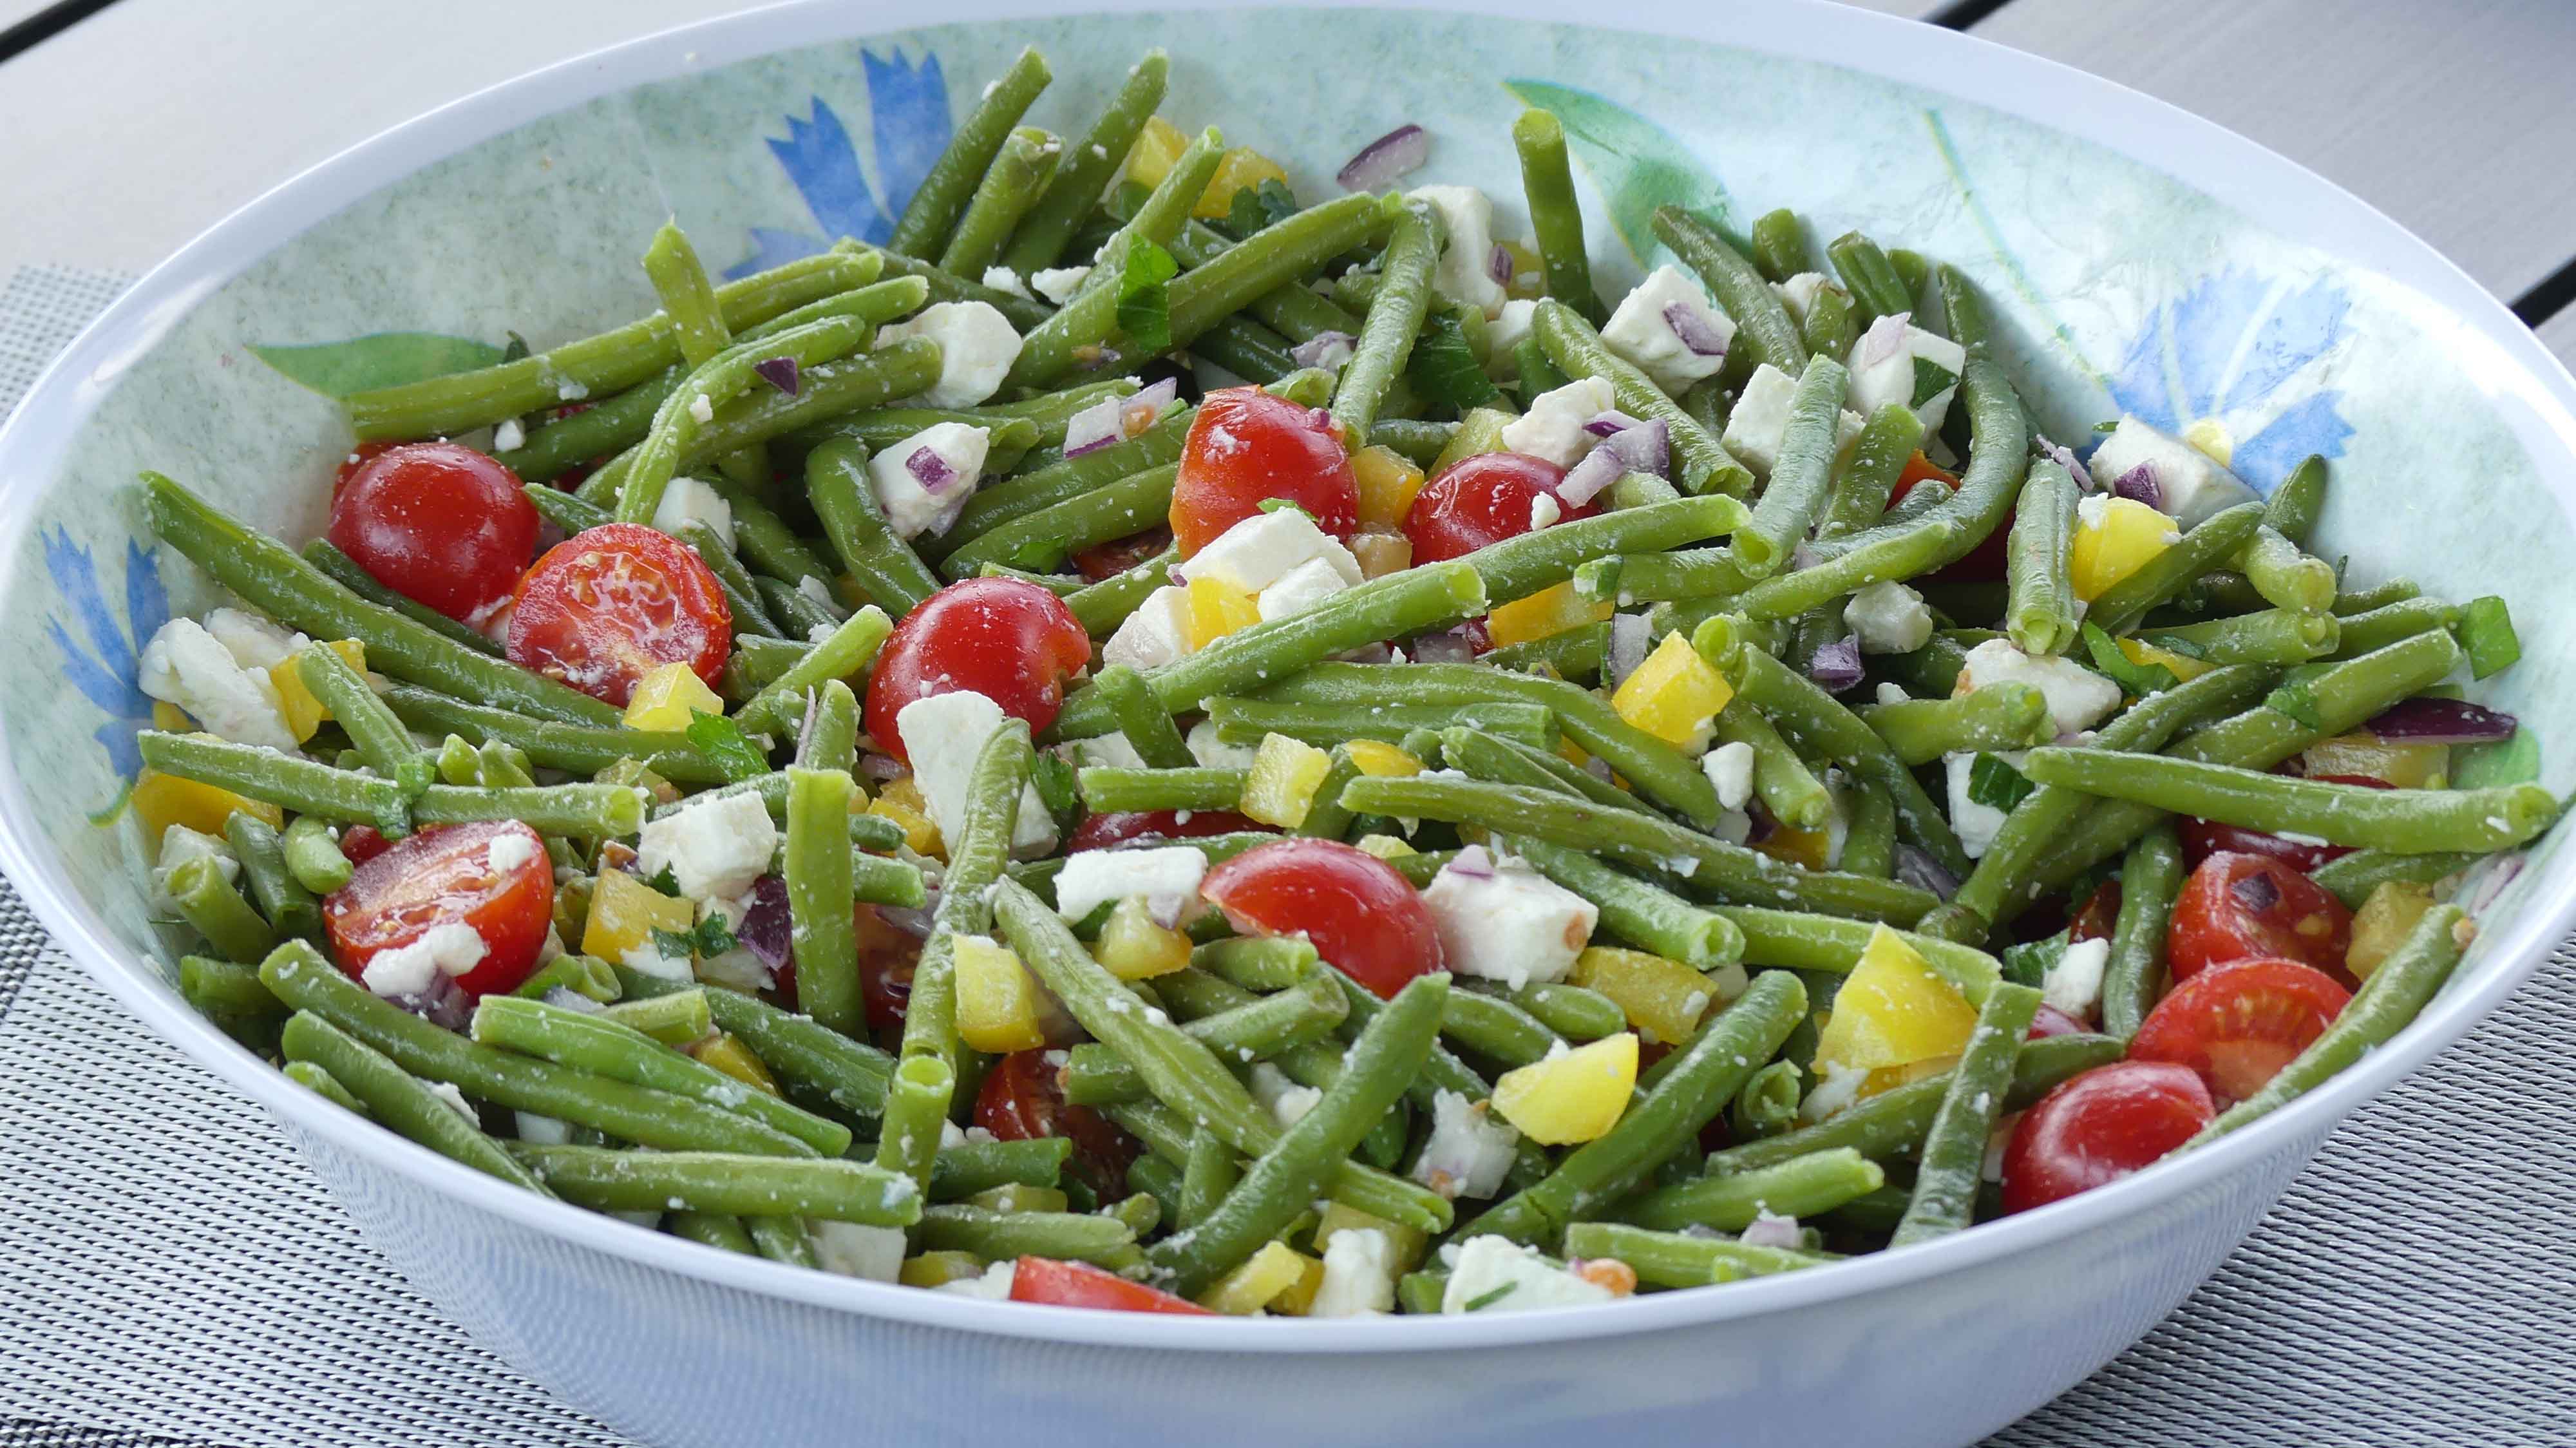 <span  class="uc_style_uc_tiles_grid_image_elementor_uc_items_attribute_title" style="color:#ffffff;">salade haricots verts a la grecque Withmo 3</span>